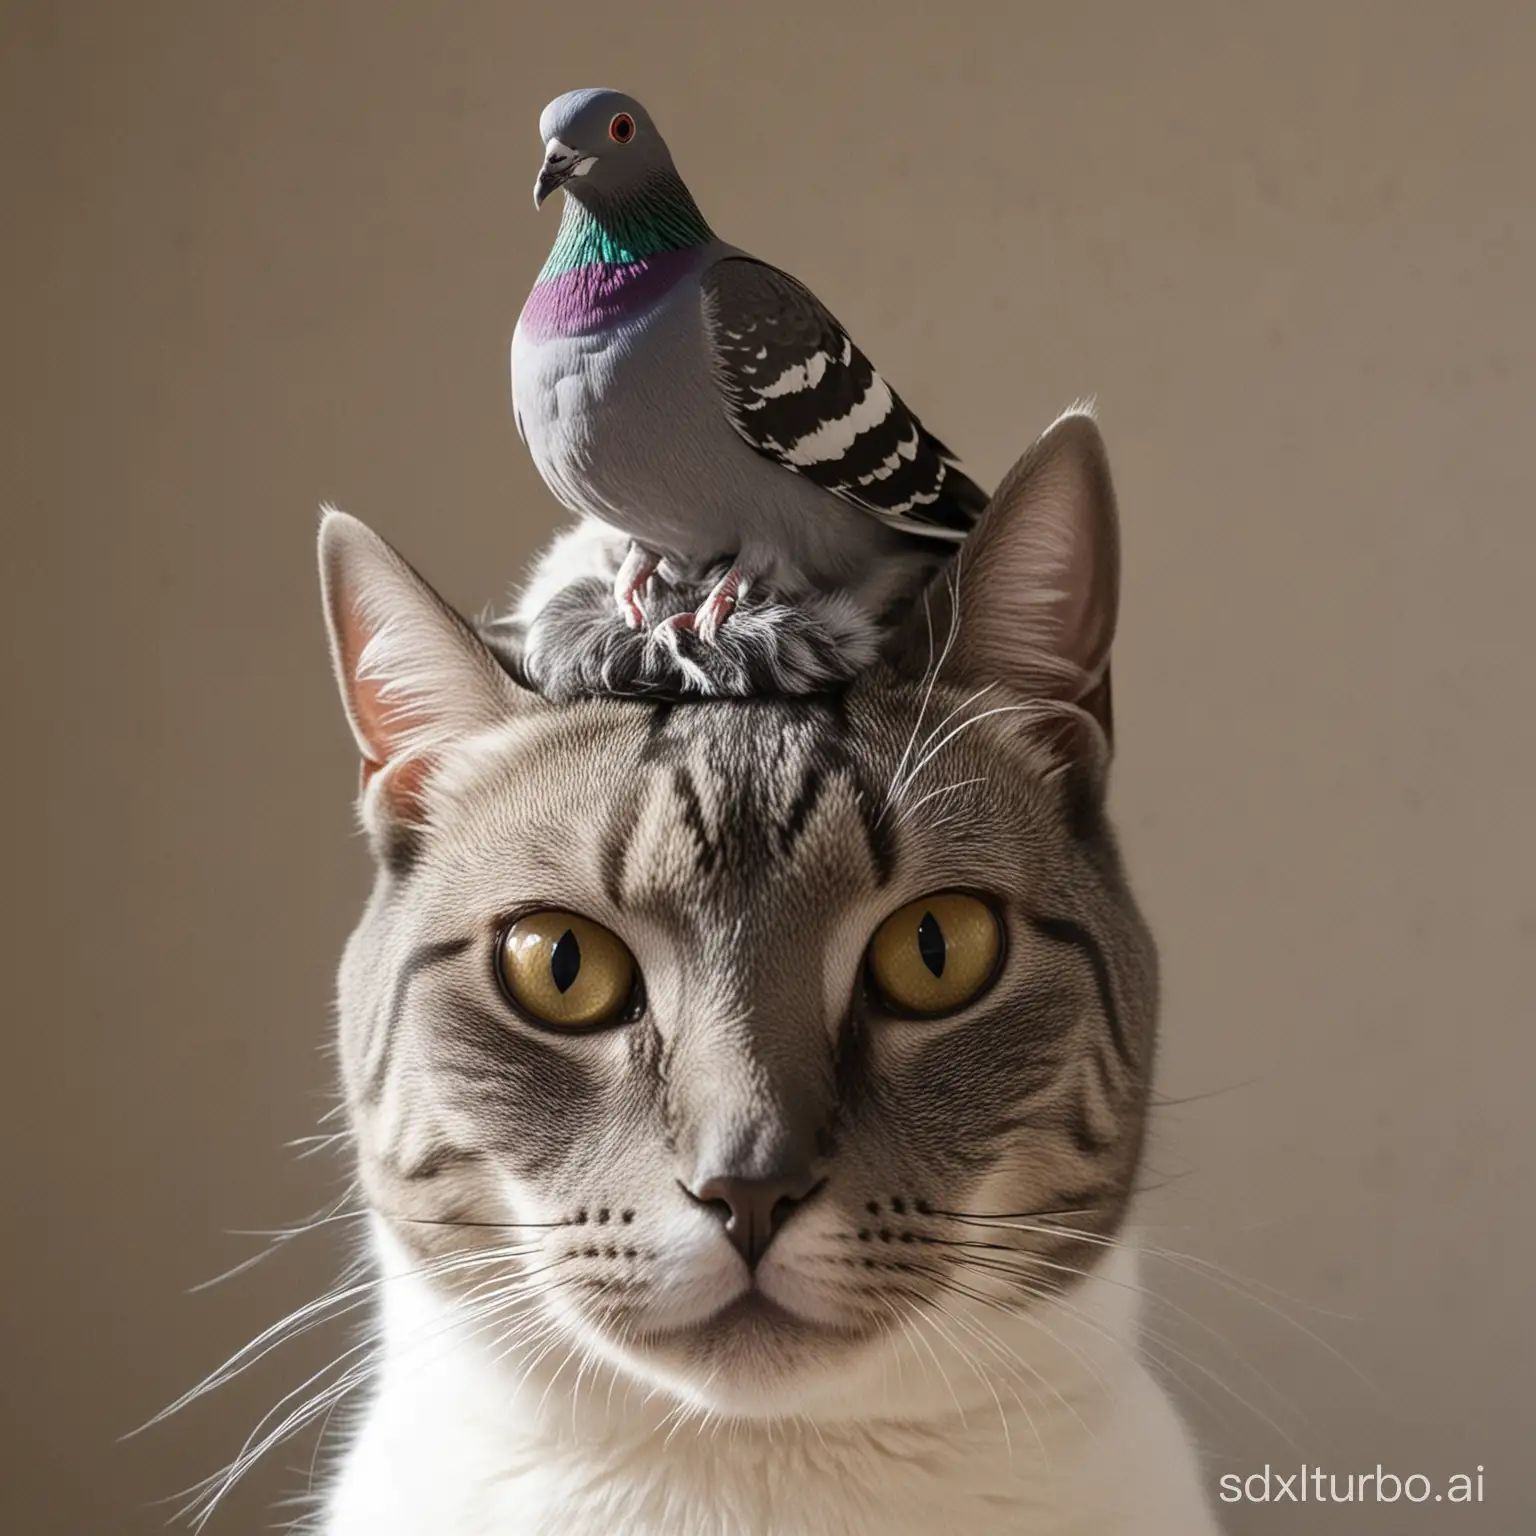 Pigeon-Perched-on-Cats-Head-Playful-Animal-Interaction